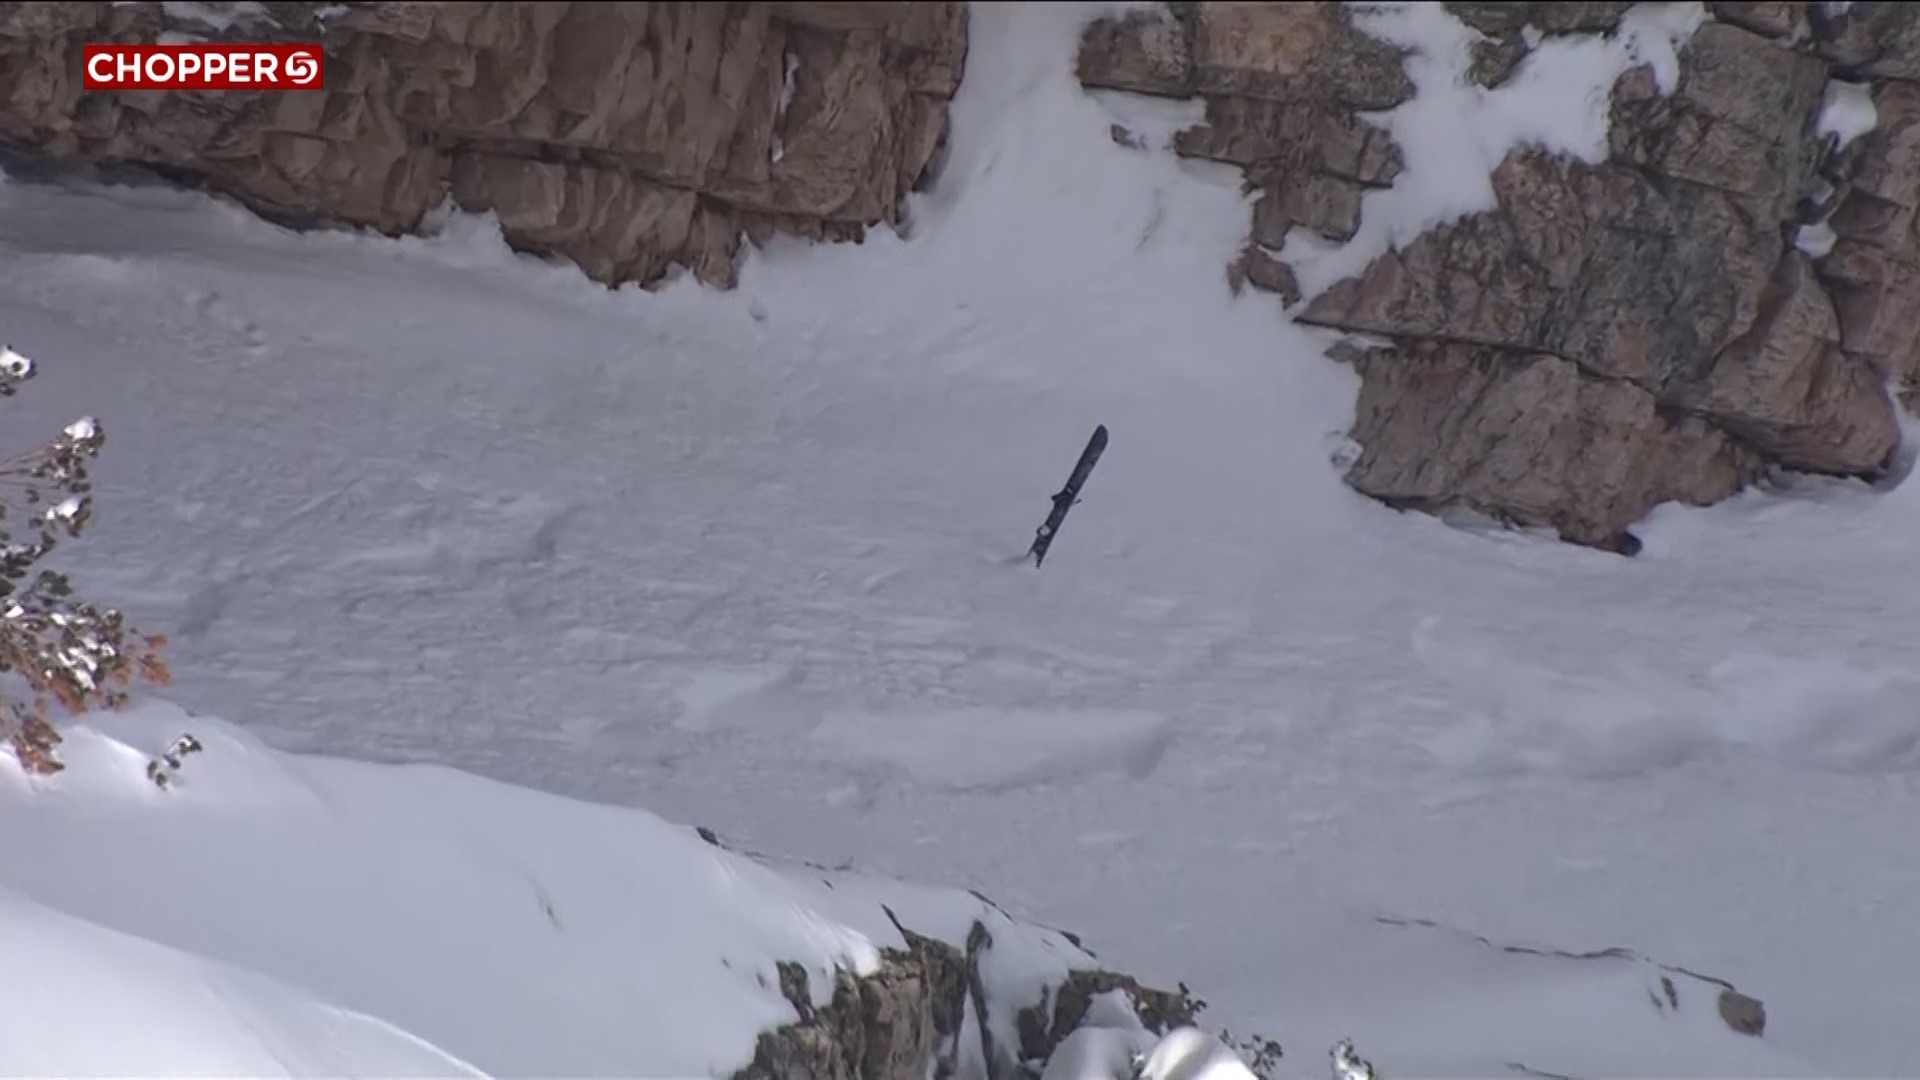 A lone ski in the area that the skier was found and rescued from....